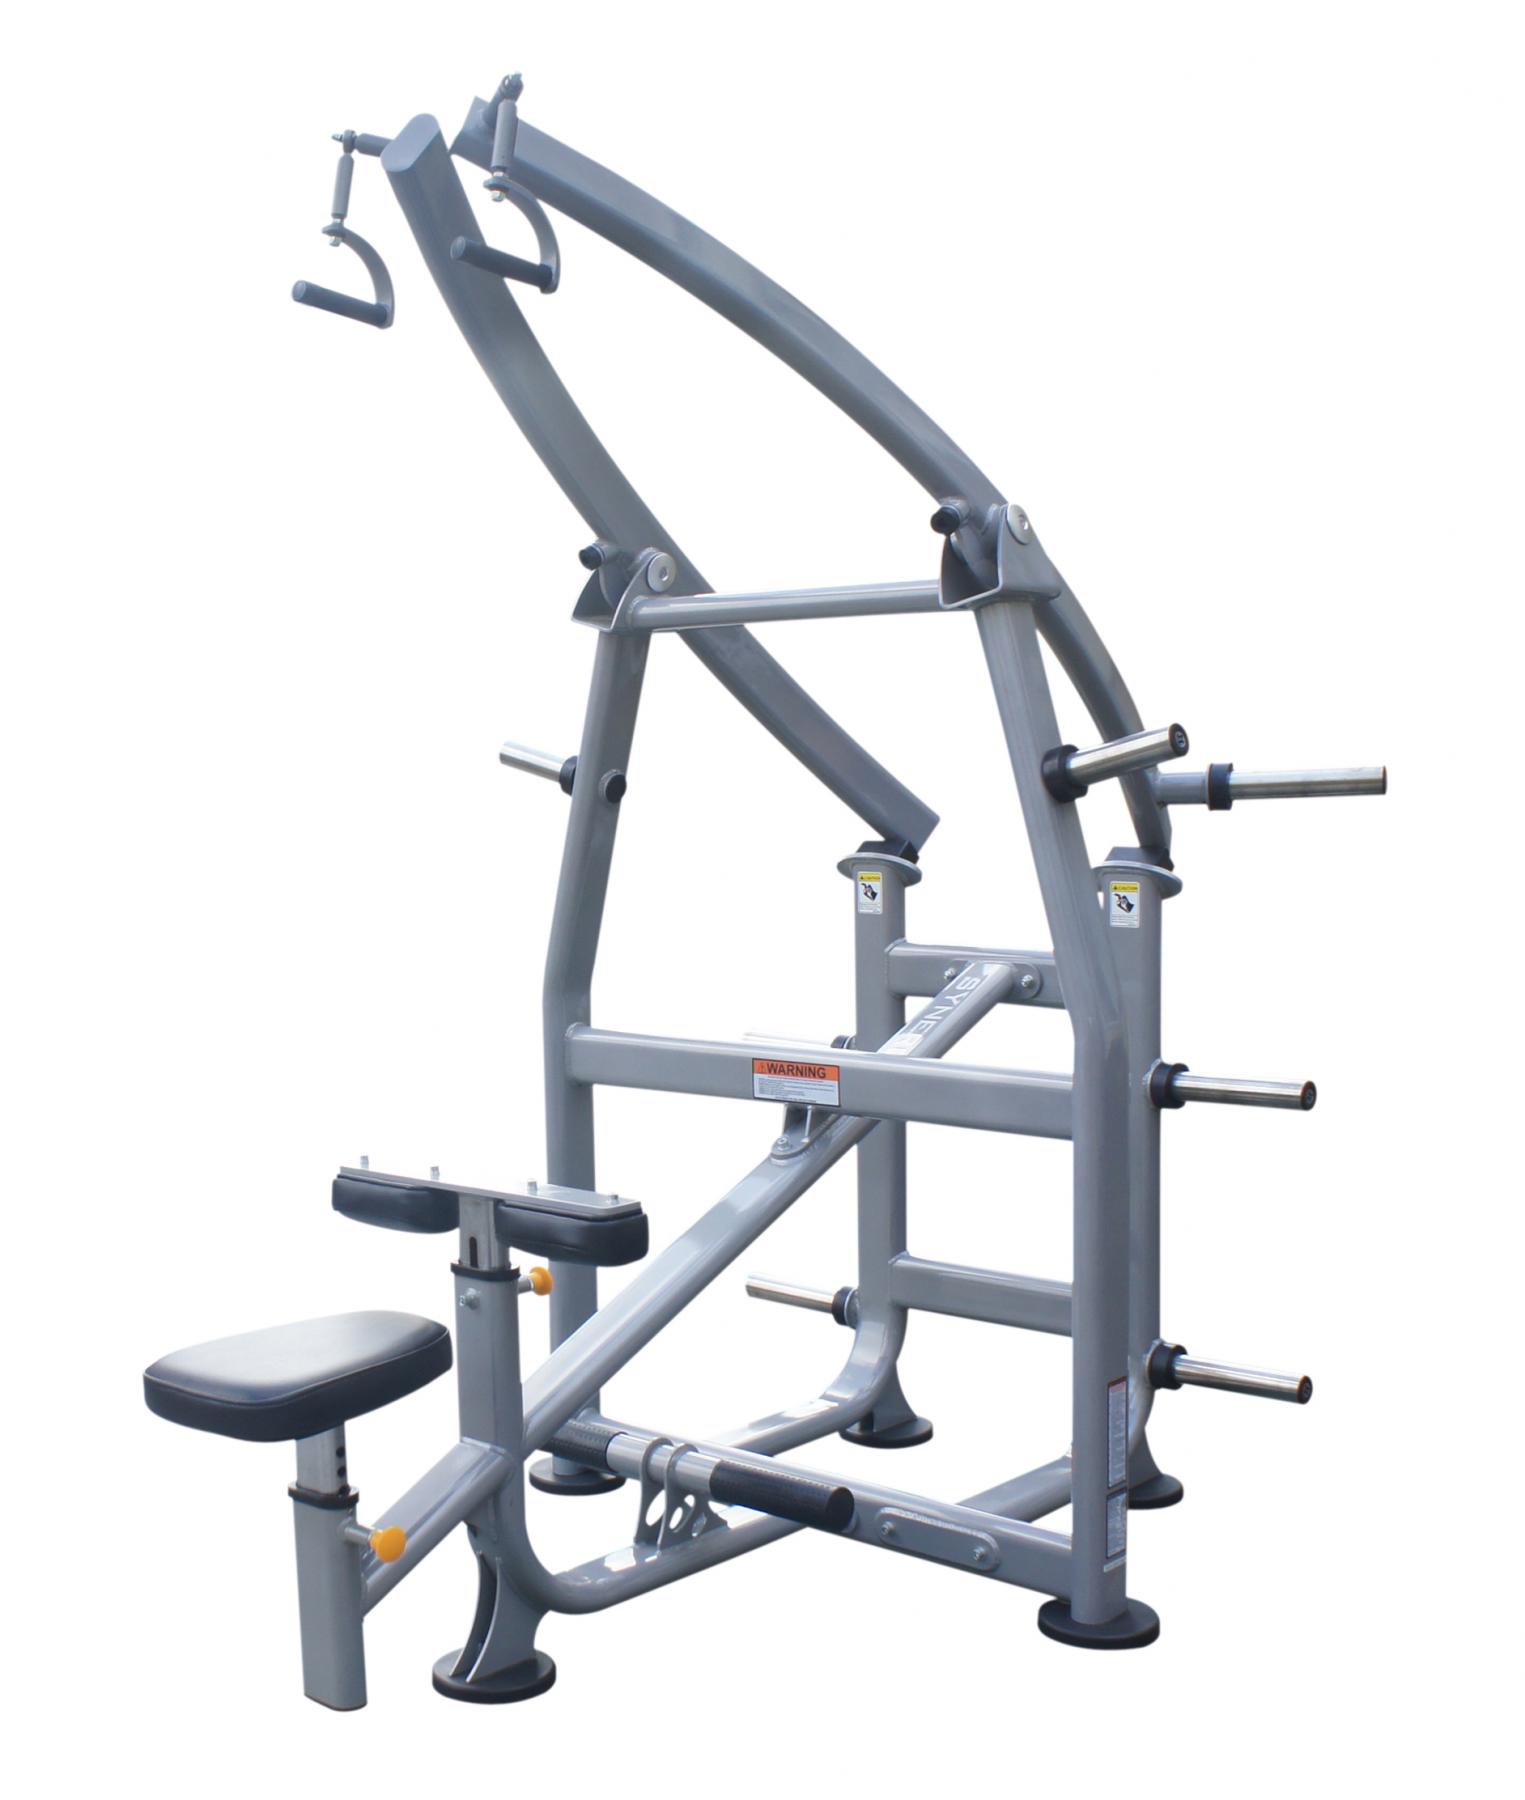 Synergy 2 plate Loaded Lat Machine